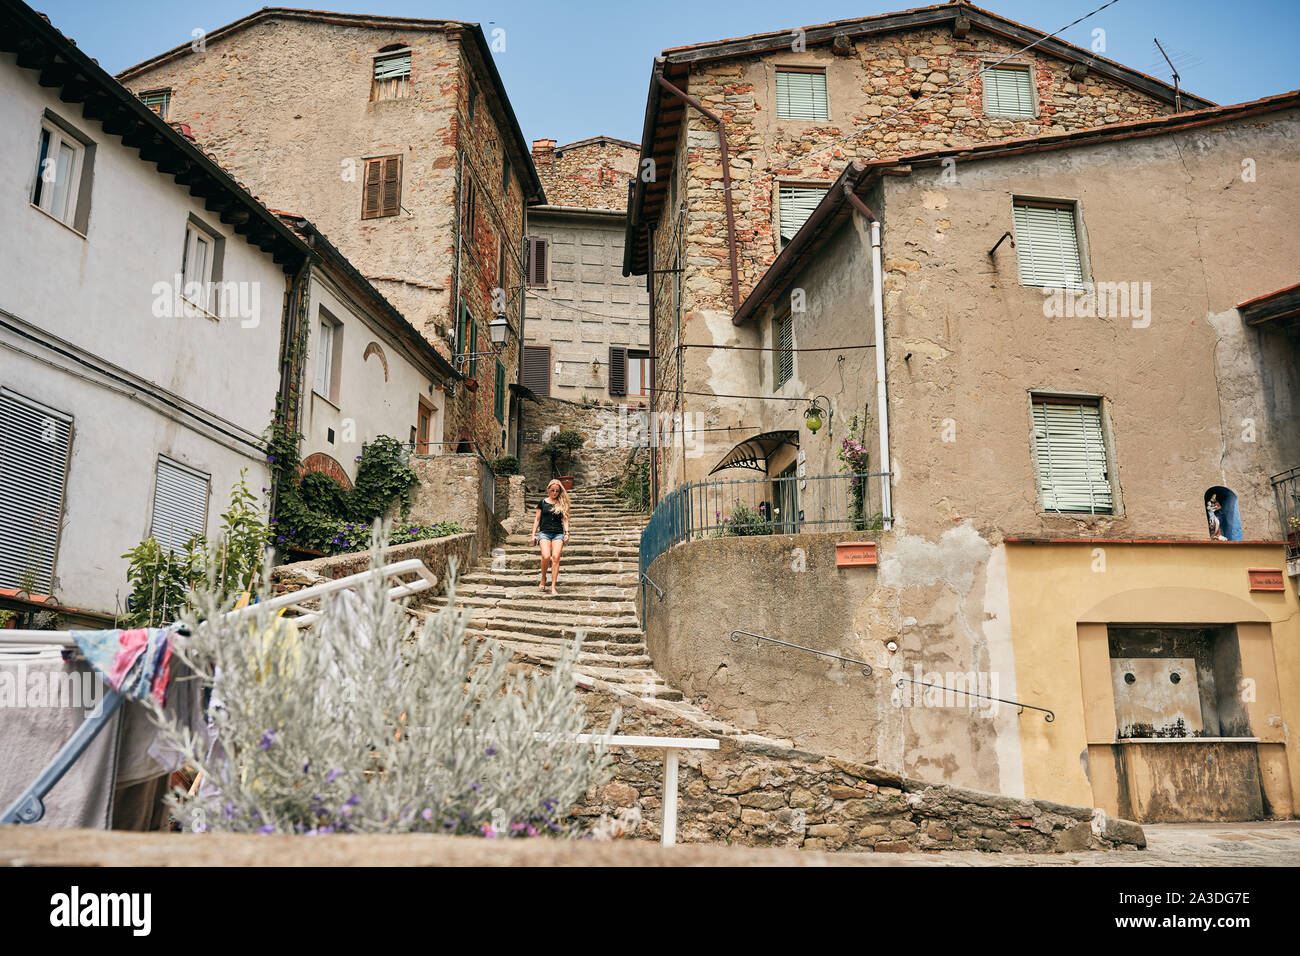 Low angle of traveling woman walking down staircase among brick houses in Tuscany Italy Stock Photo